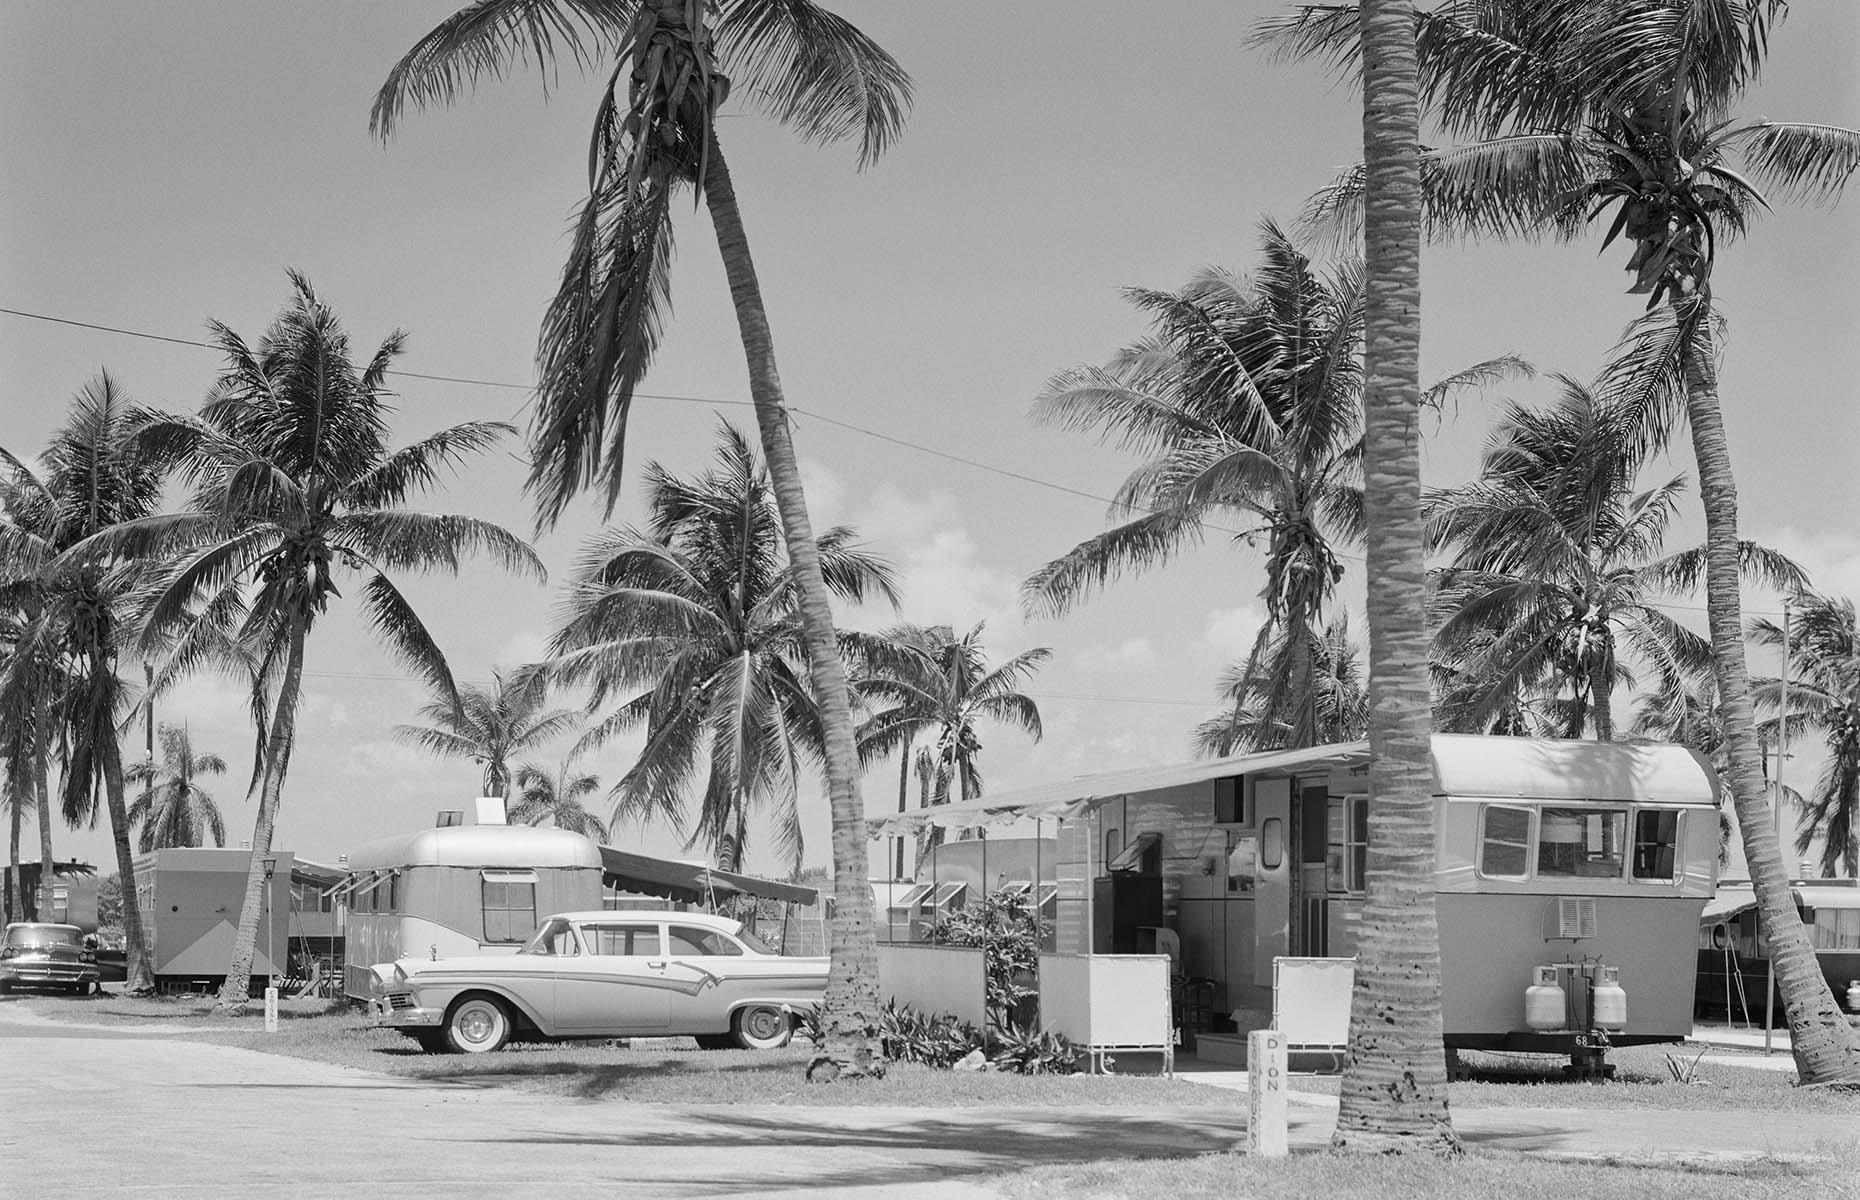 By the 1940s, self-catering vacation cottages and chalets close to the seaside, and often a stone’s throw from major highways, were a frequent sight too. Most parks would also have plenty of space for trailers and RVs. Pictured here is a trailer camp on Florida's Gulf Coast around 1950.